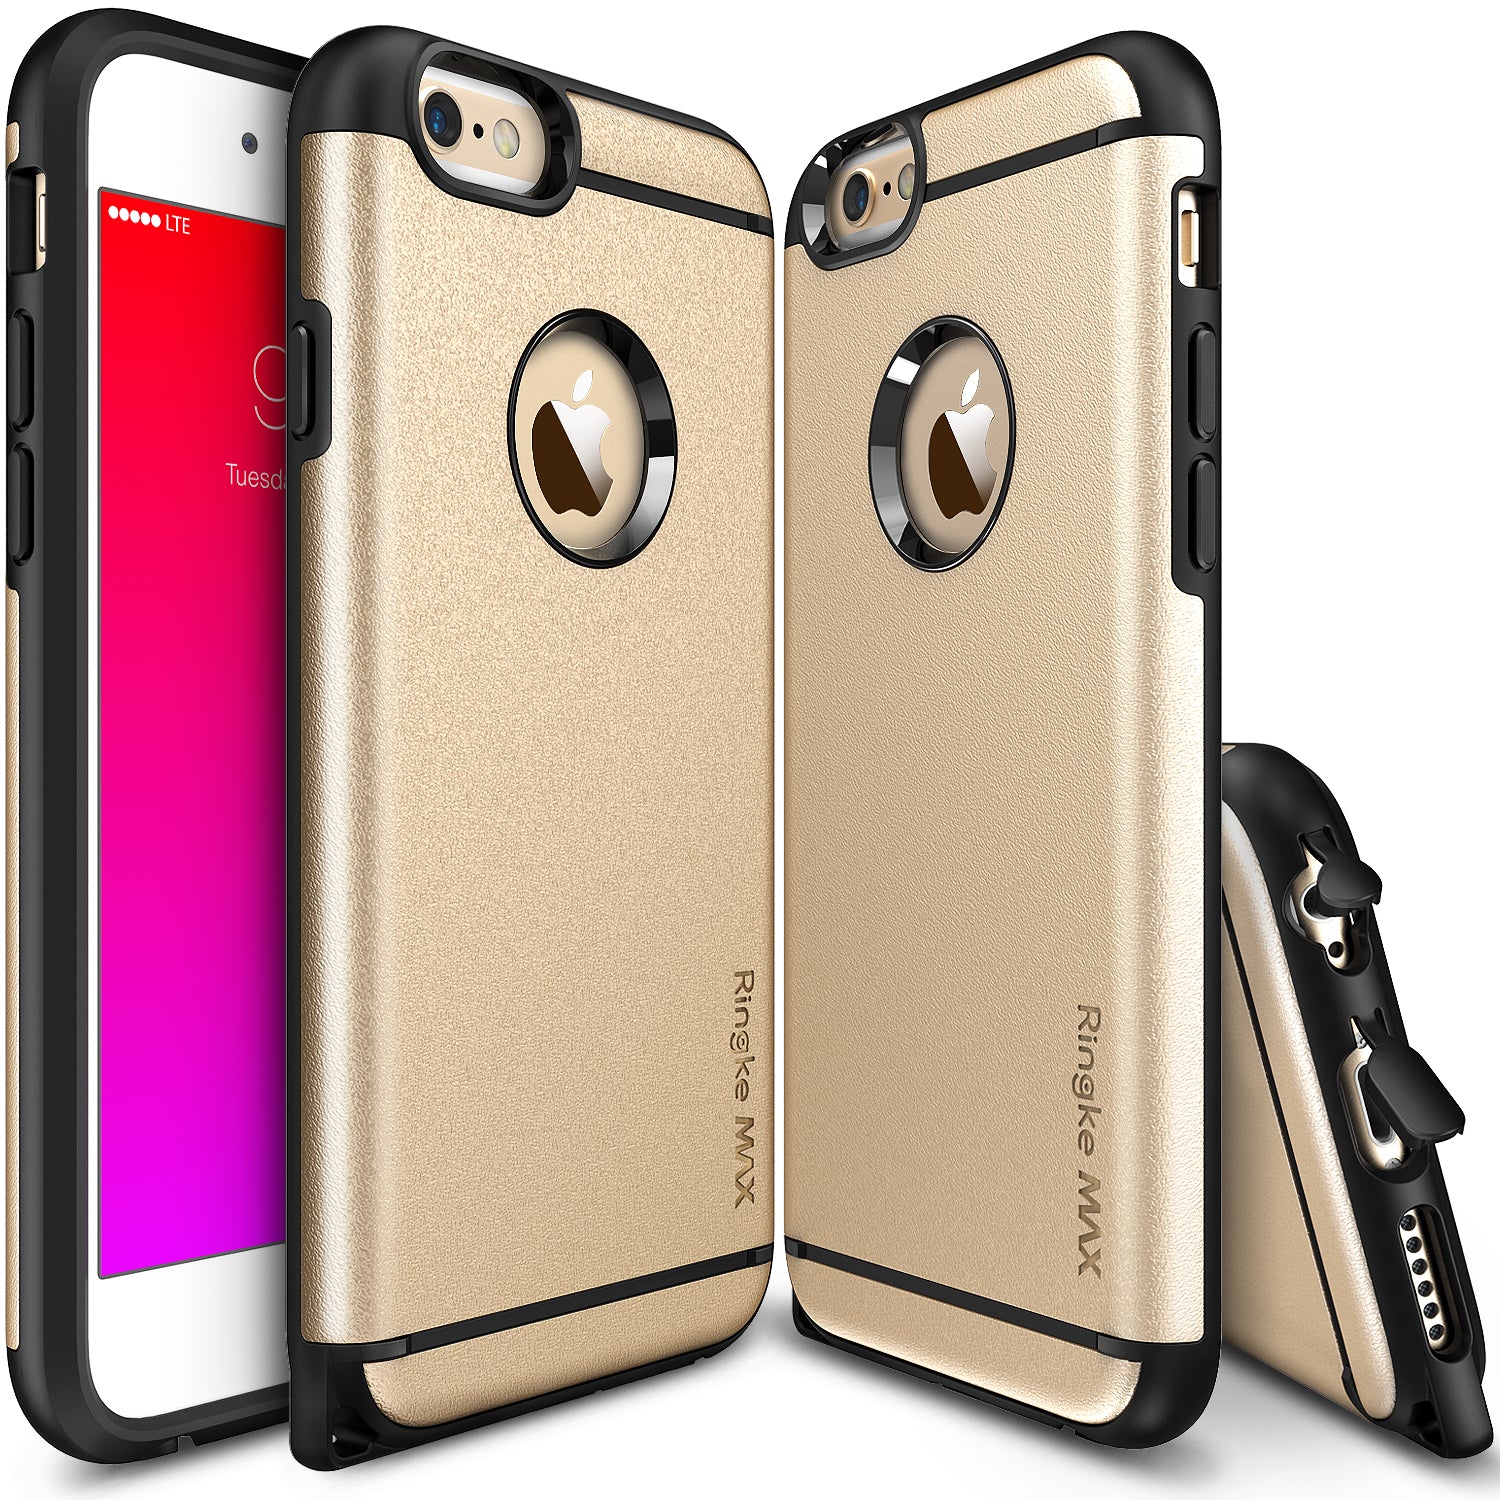 ringke max heavy duty rugged hard case cover for iphone 6 6s main royal gold